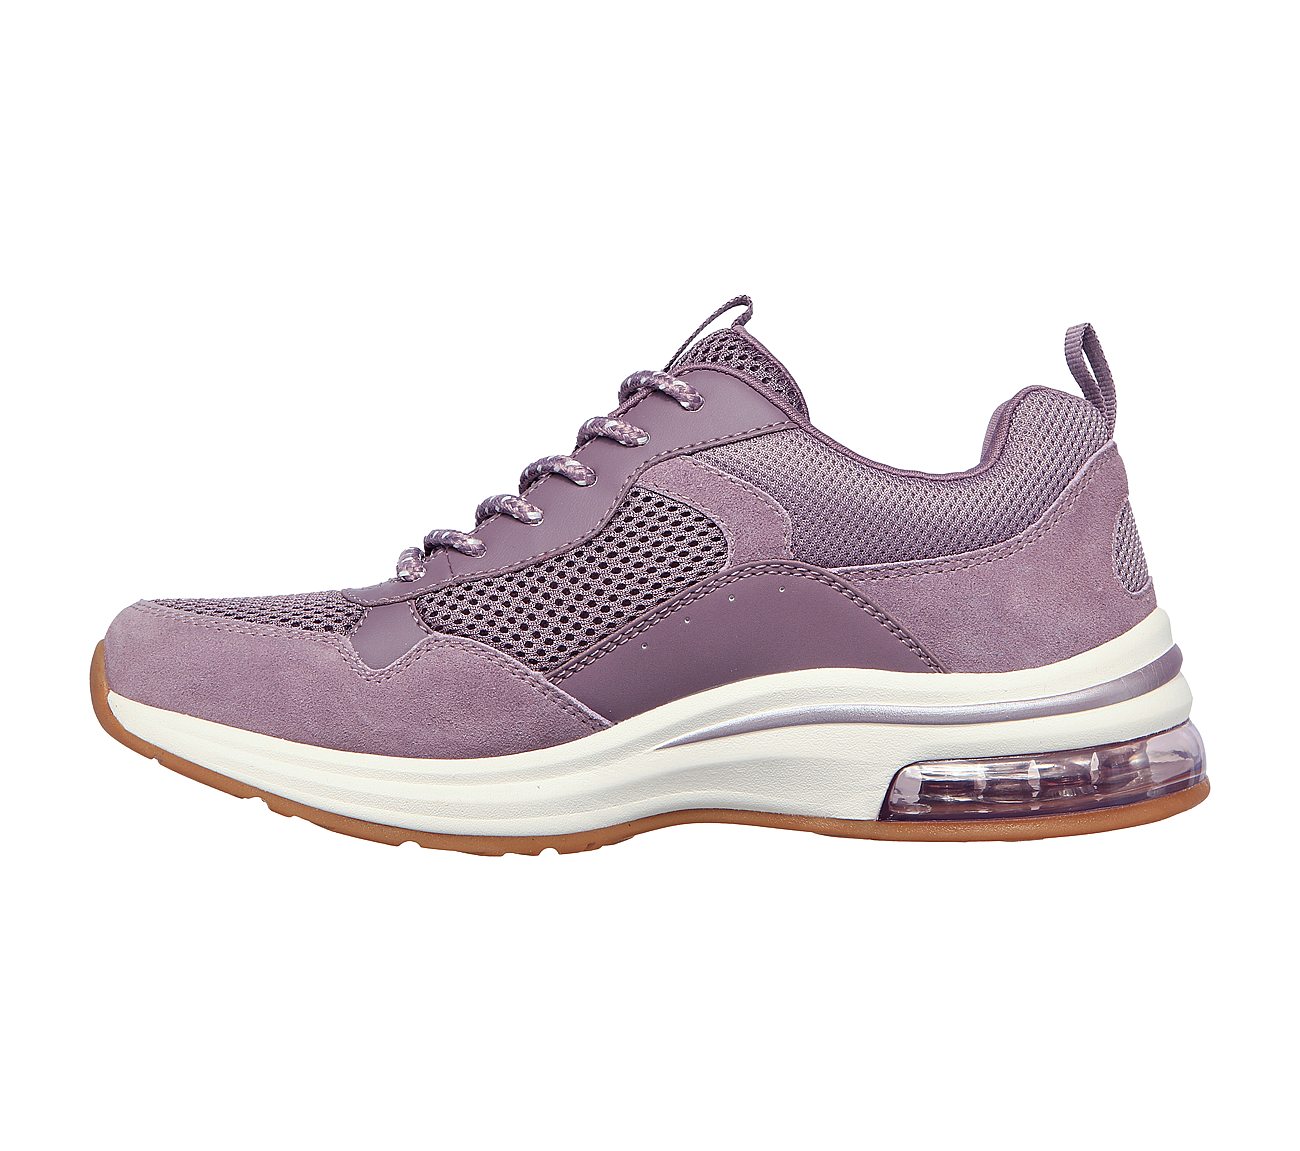 BOBS PULSE AIR - NIGHT MYSTIC, Mauve image number null